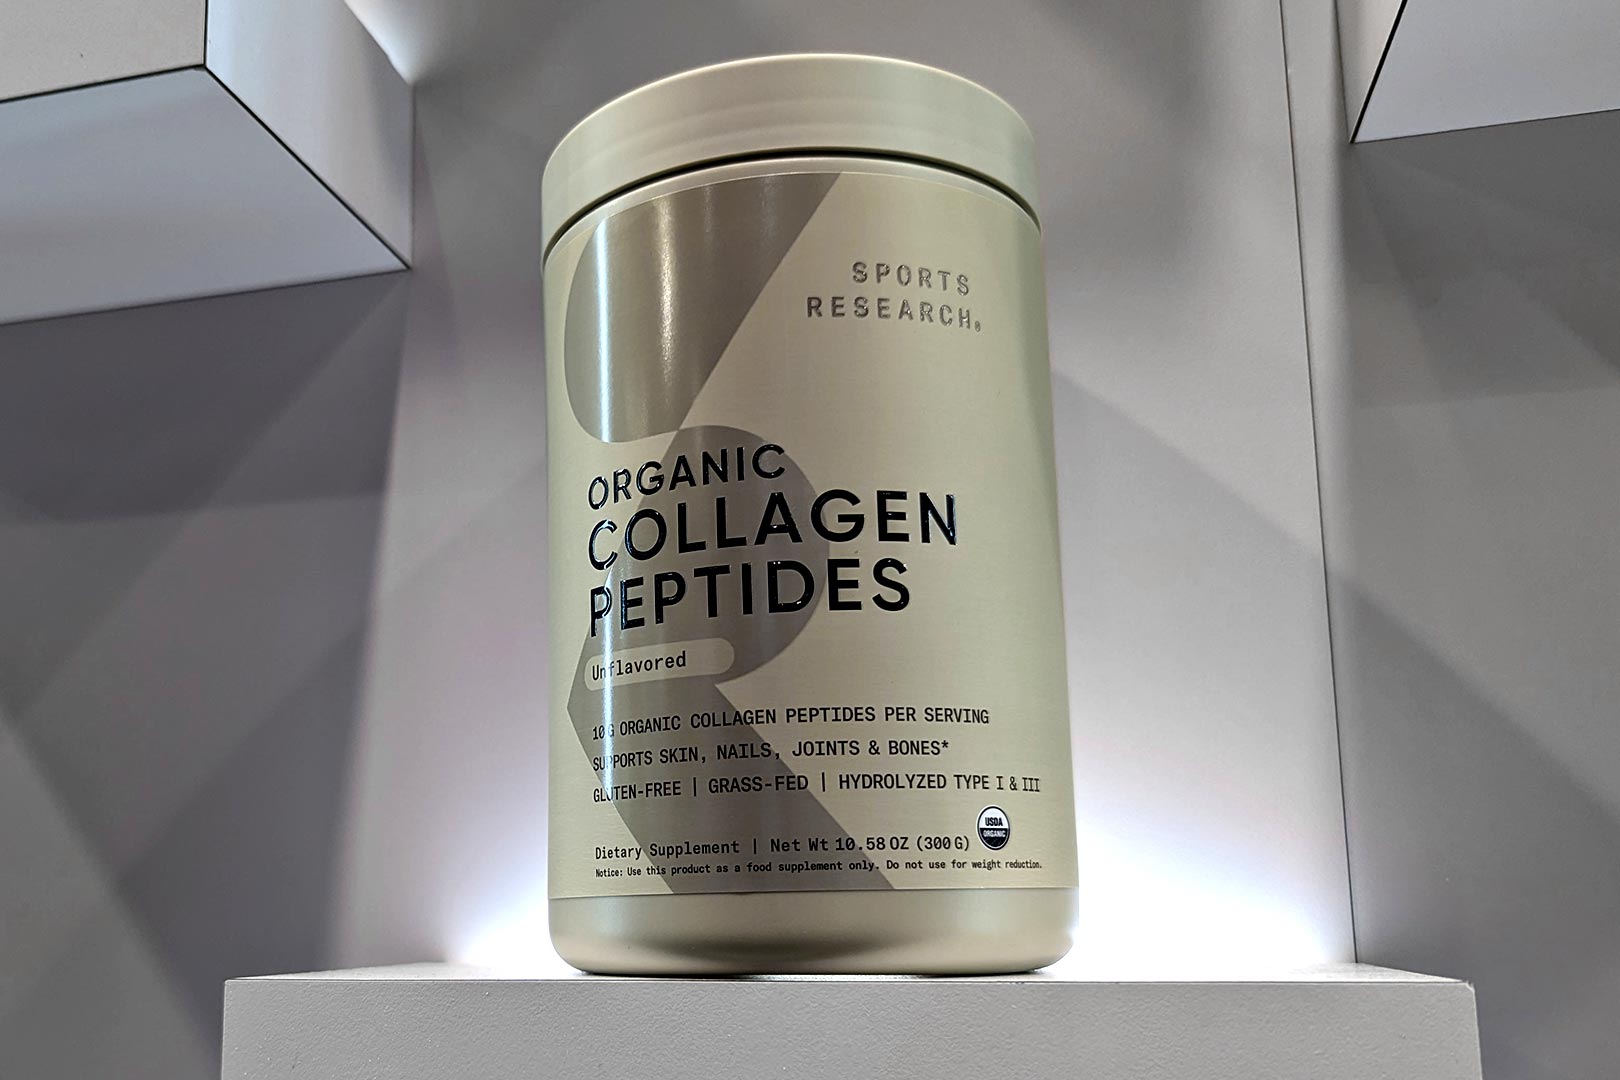 Sports Research introduces the first organic collagen product